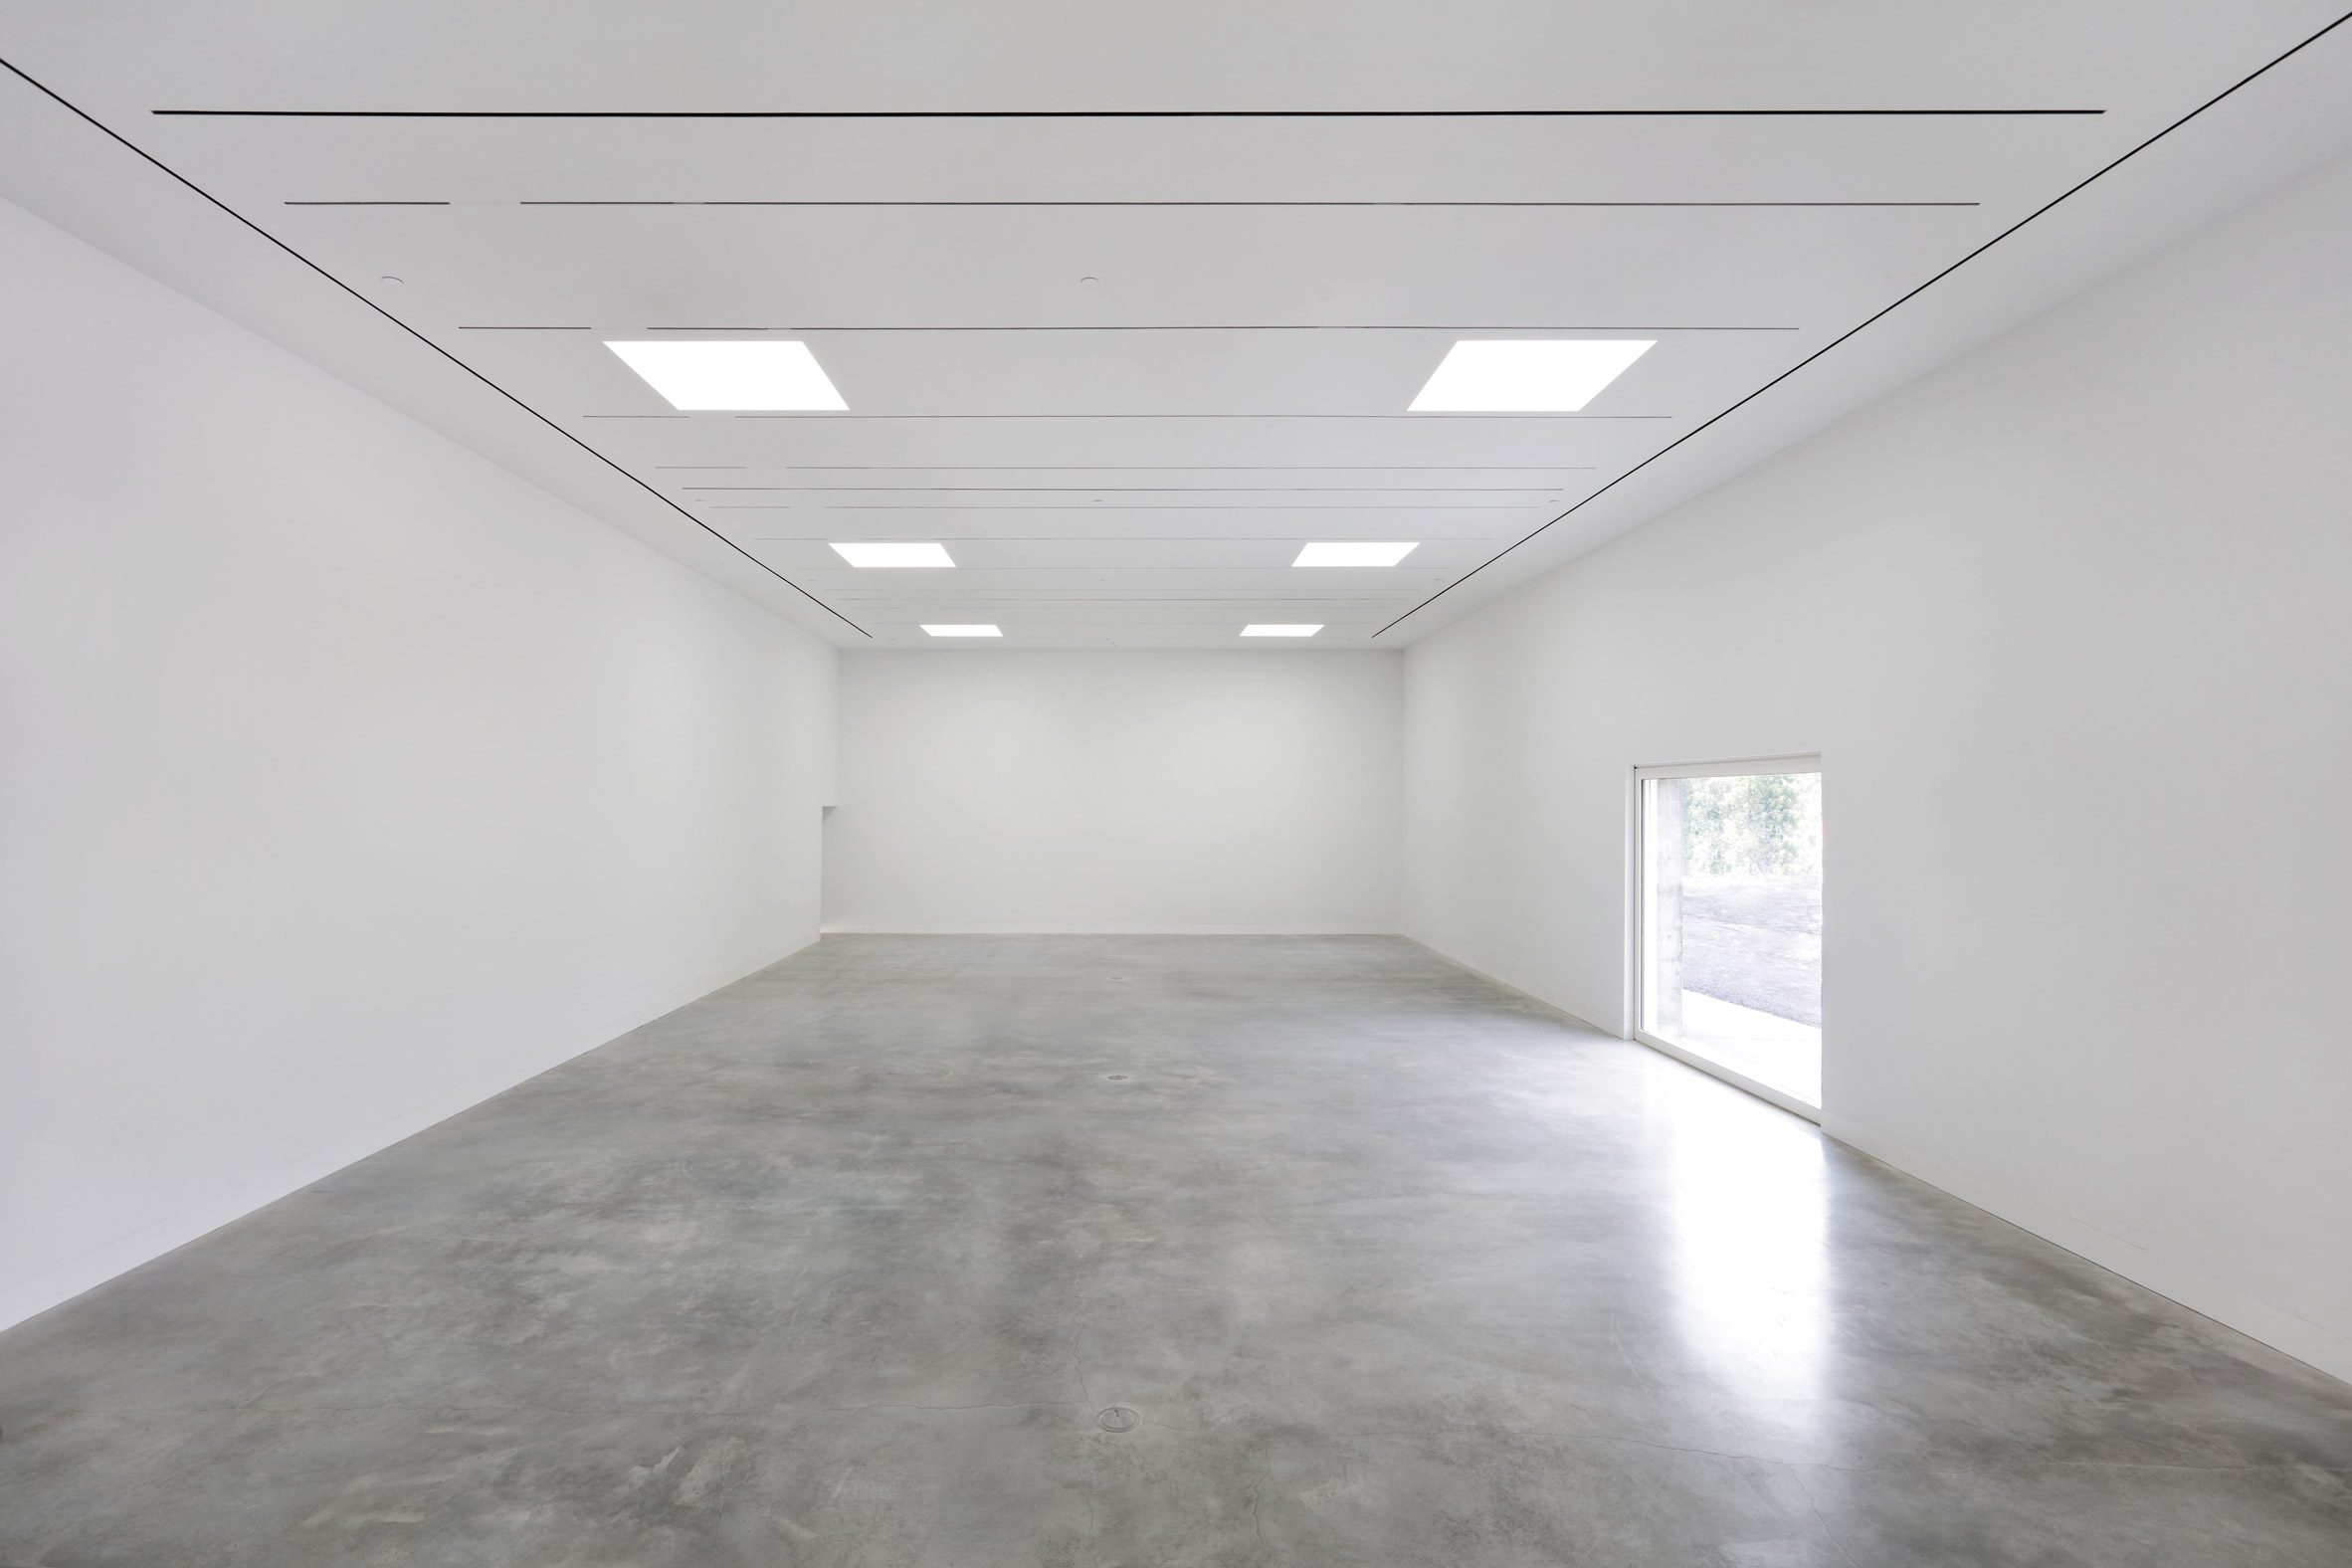 Polished concrete floors and white ceilings